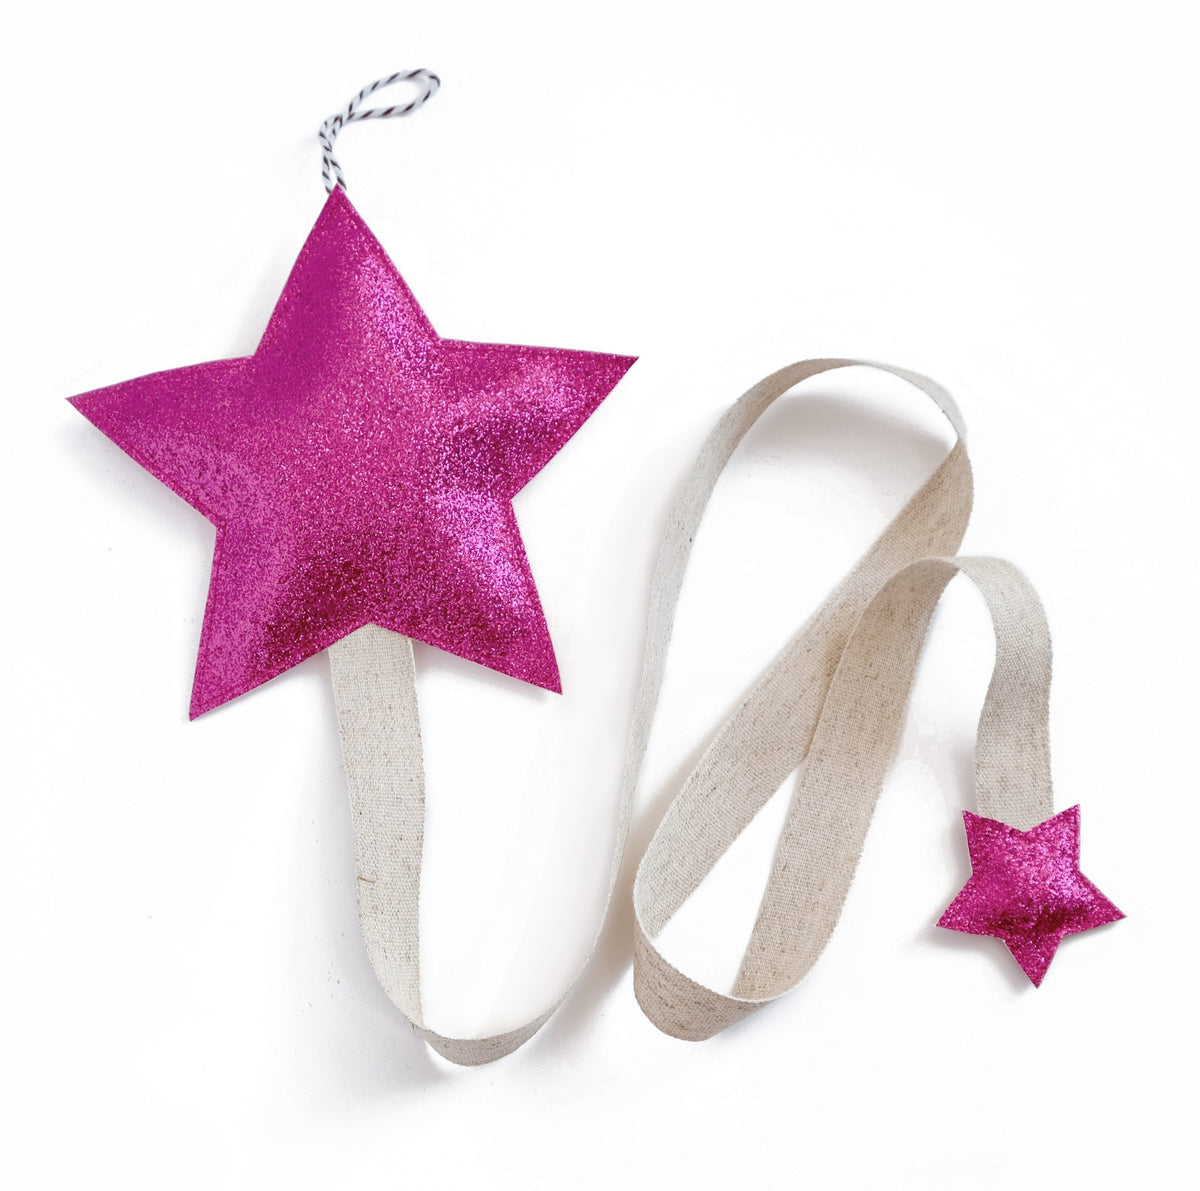 Stylish star shaped hair clip holder that can be mounted onto a wall or door.